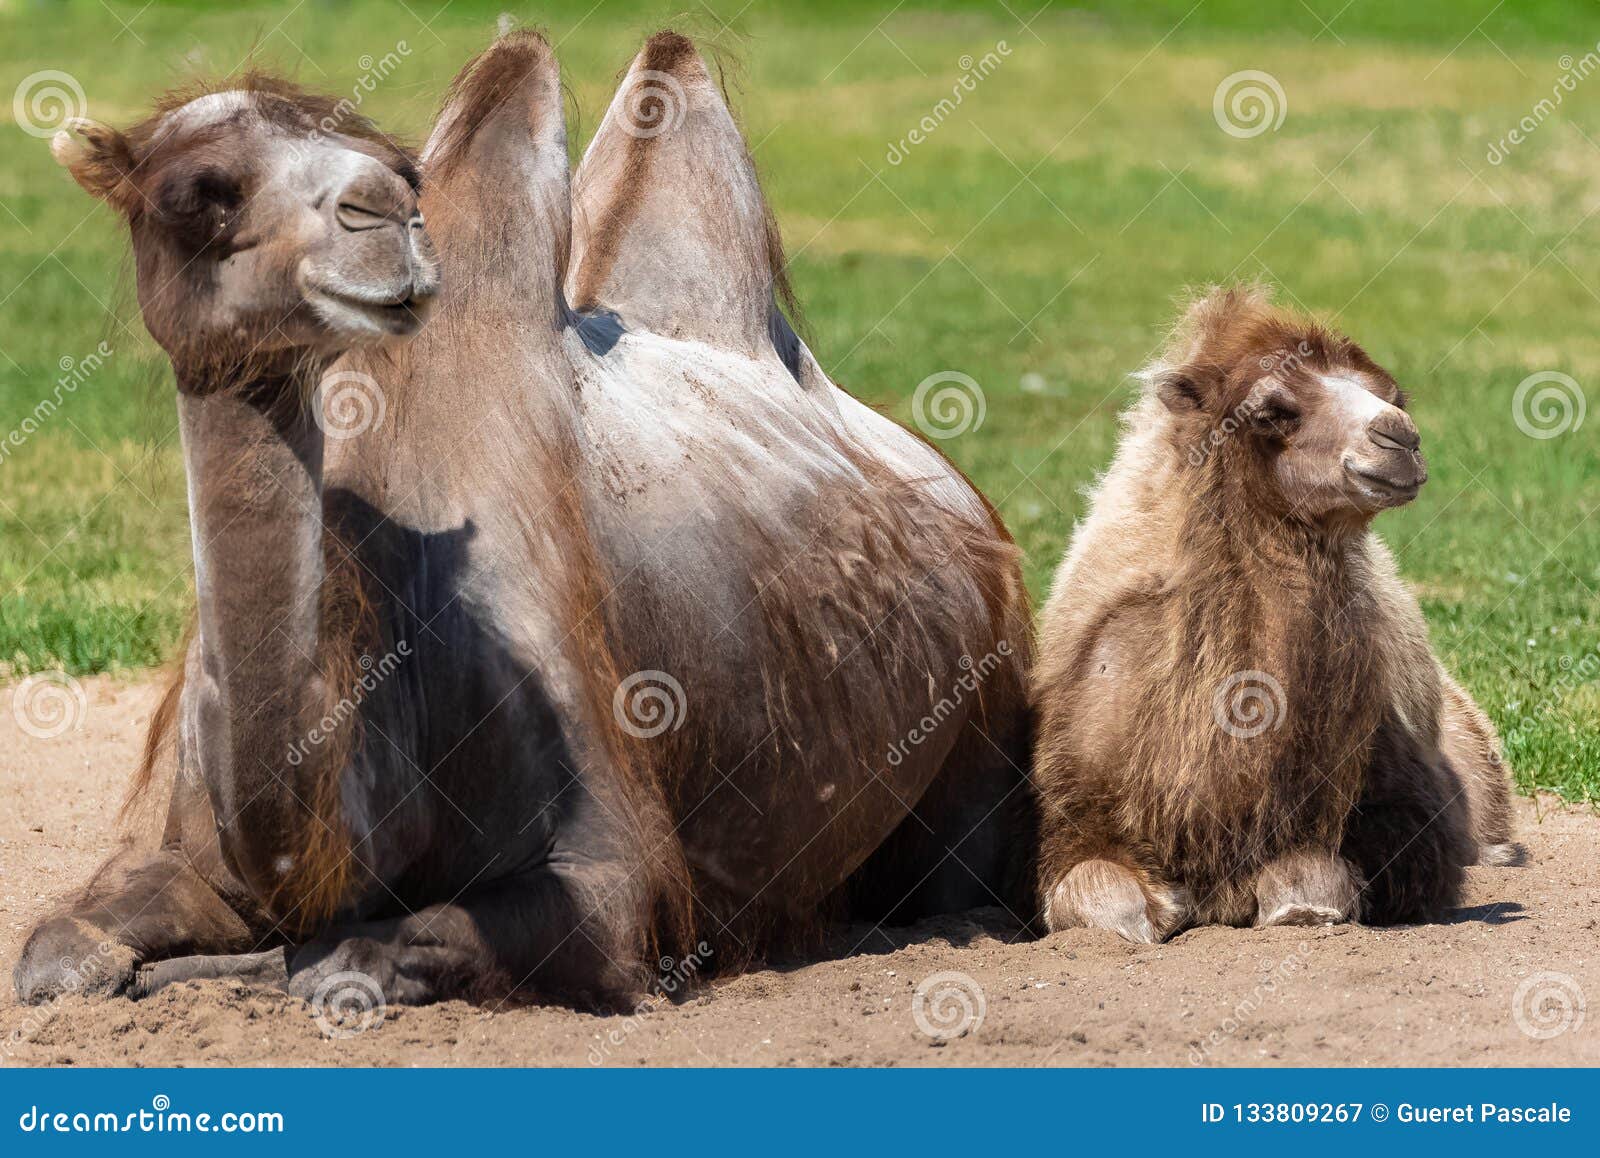 Bactrian camel stock image. Image of asia, outdoors - 133809267